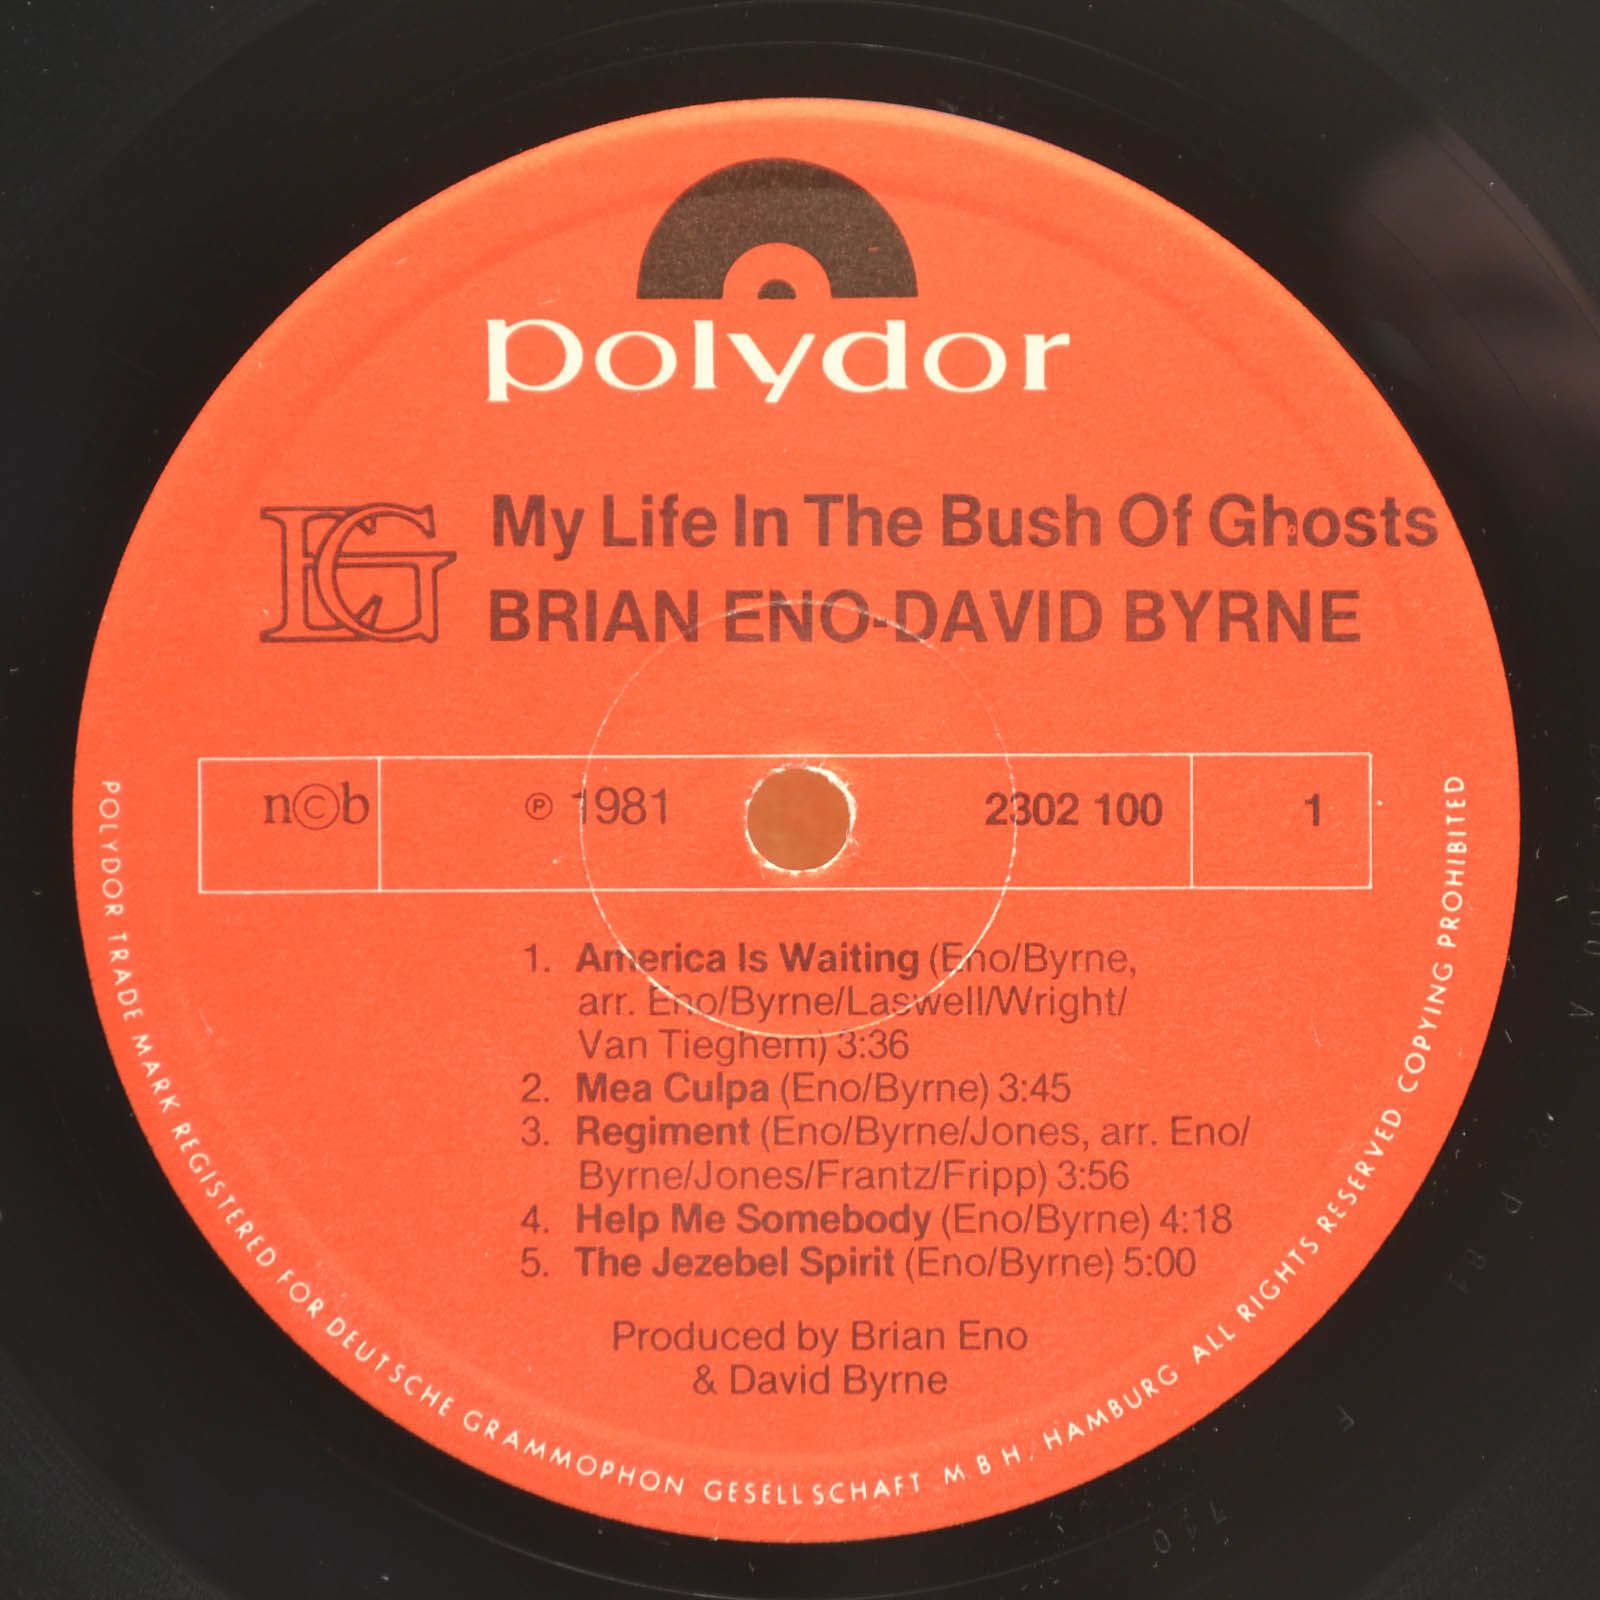 Brian Eno - David Byrne — My Life In The Bush Of Ghosts, 1981